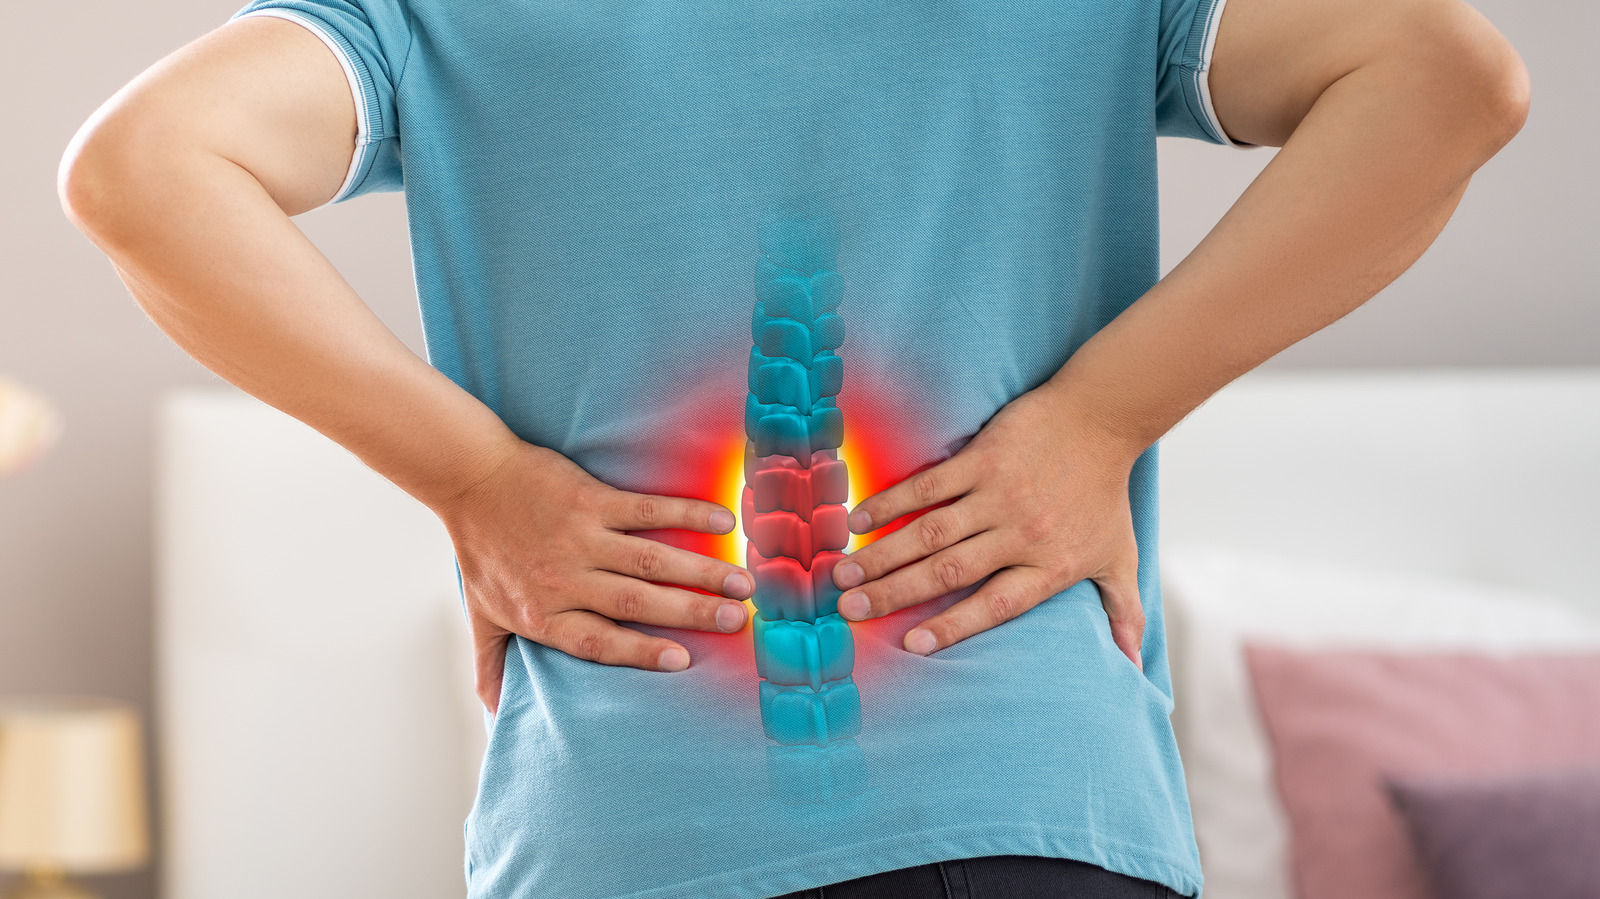 Home Remedies to Ease Your Lower Back Pain